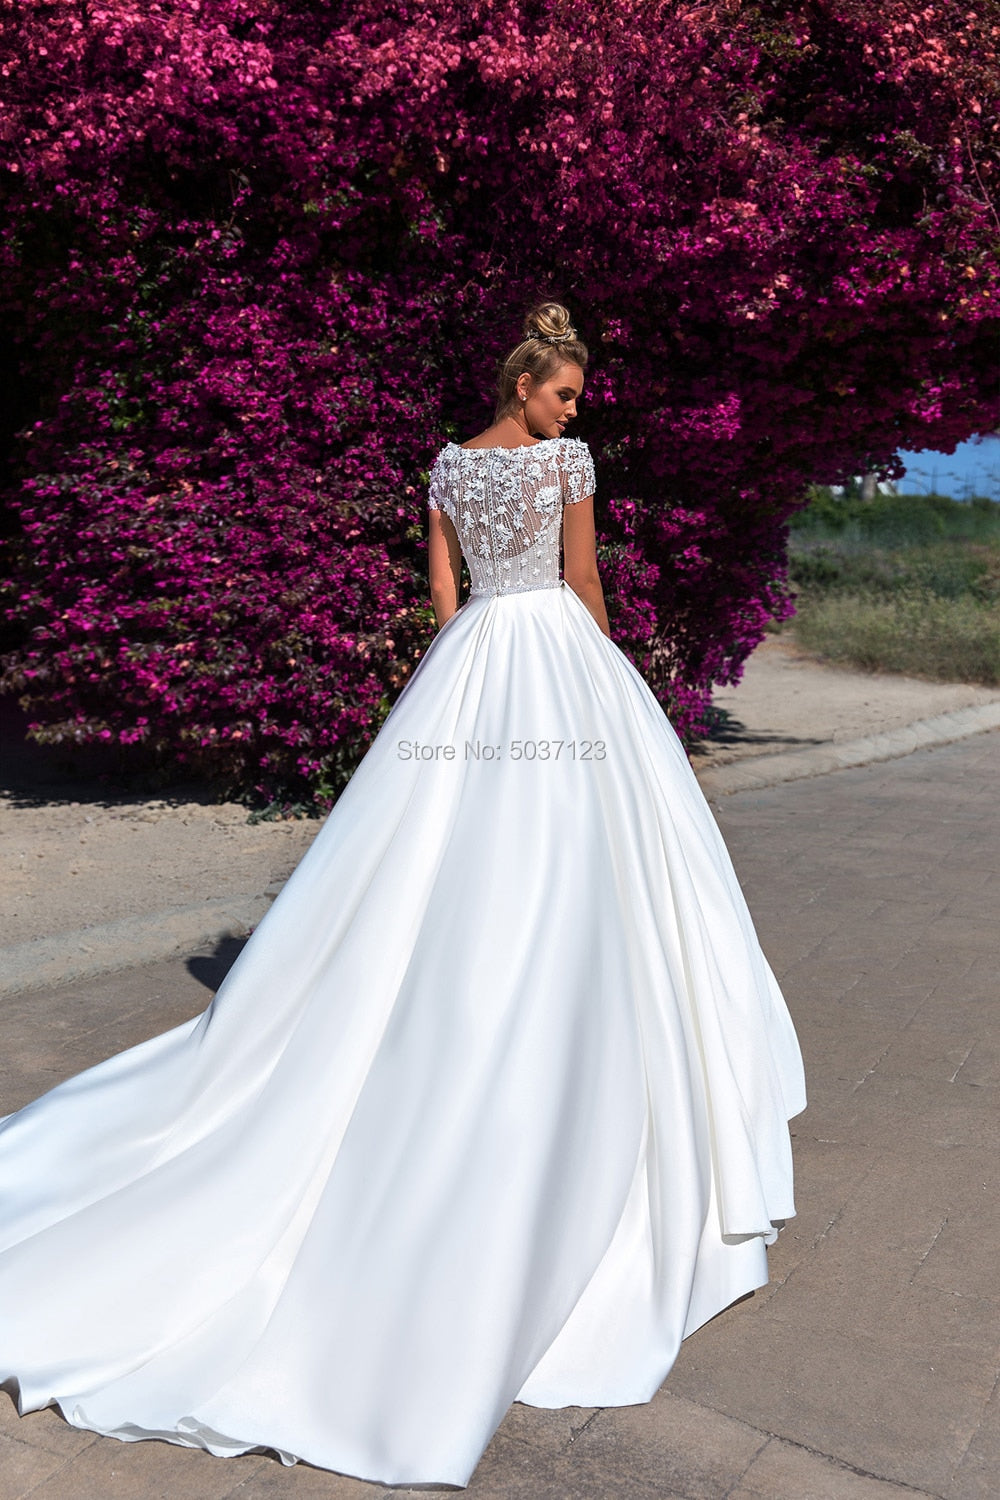 Luxury Satin A Line Wedding Dresses with Pockets Top Full Beads Scoop Cap Sleeves Long Pleated Bridal Gowns Vestidos Noiva